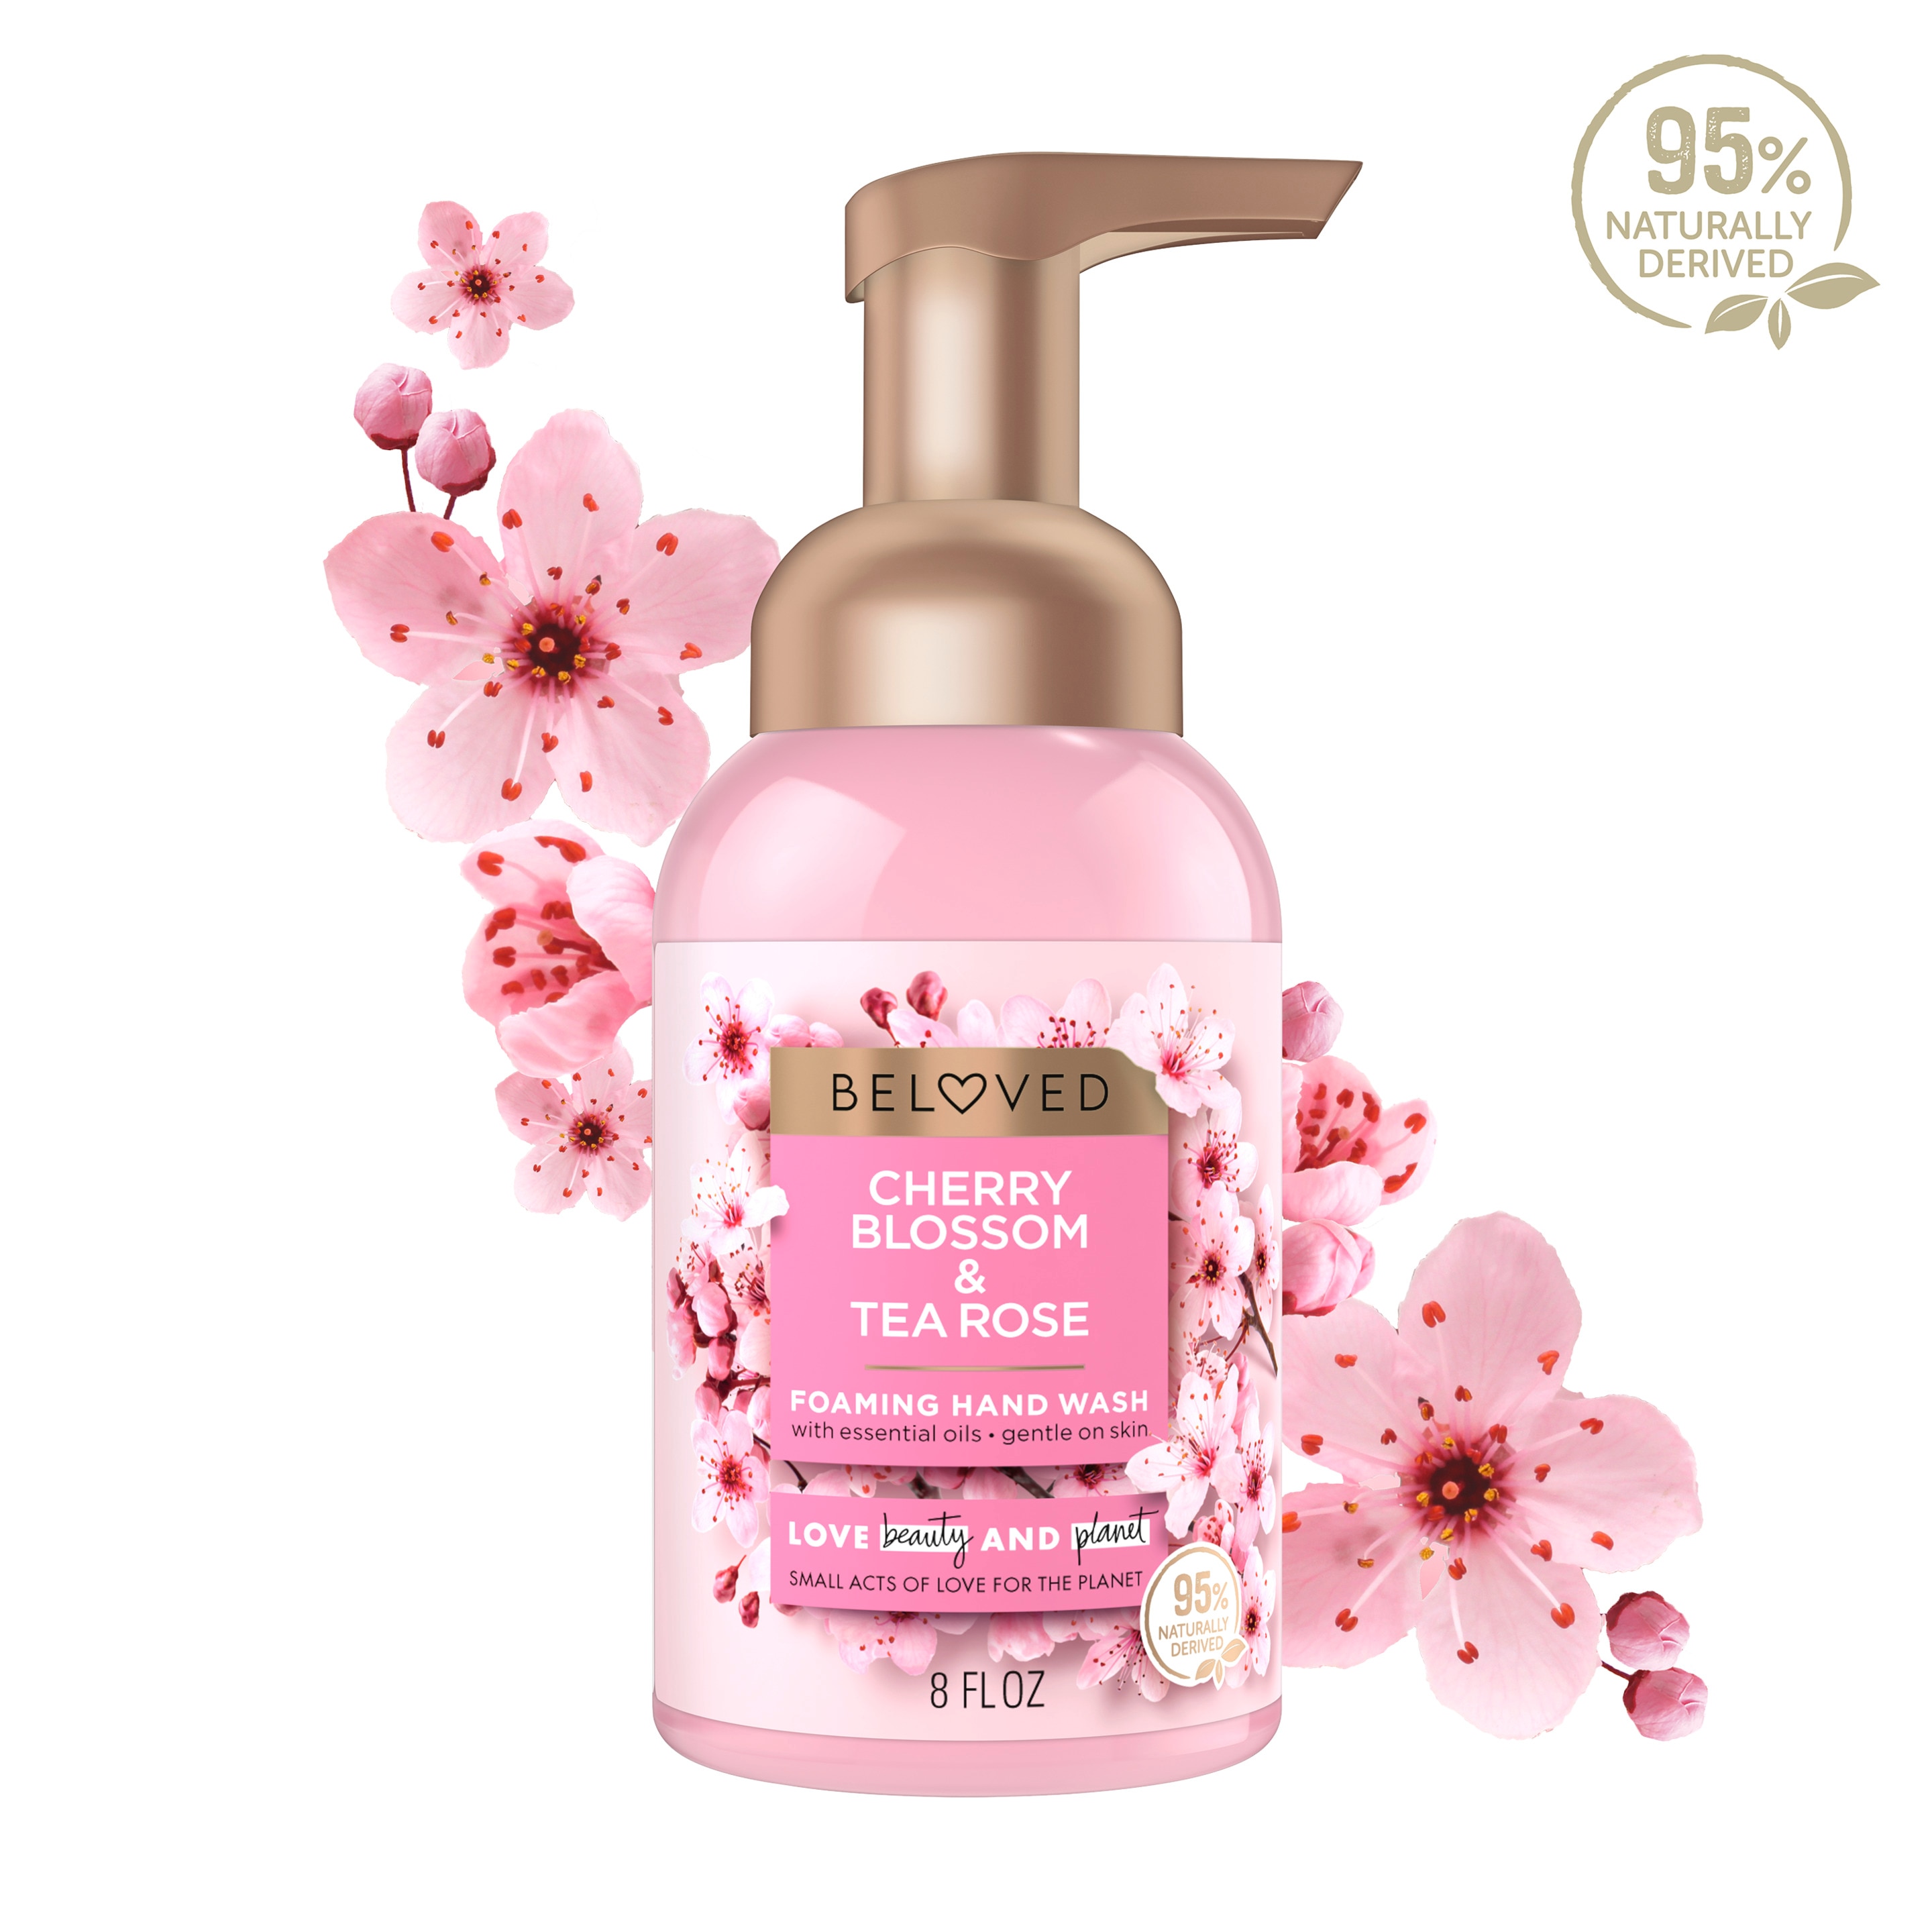 Beloved by Love Beauty and Planet Cherry Blossom & Tea Rose Foaming Hand Wash